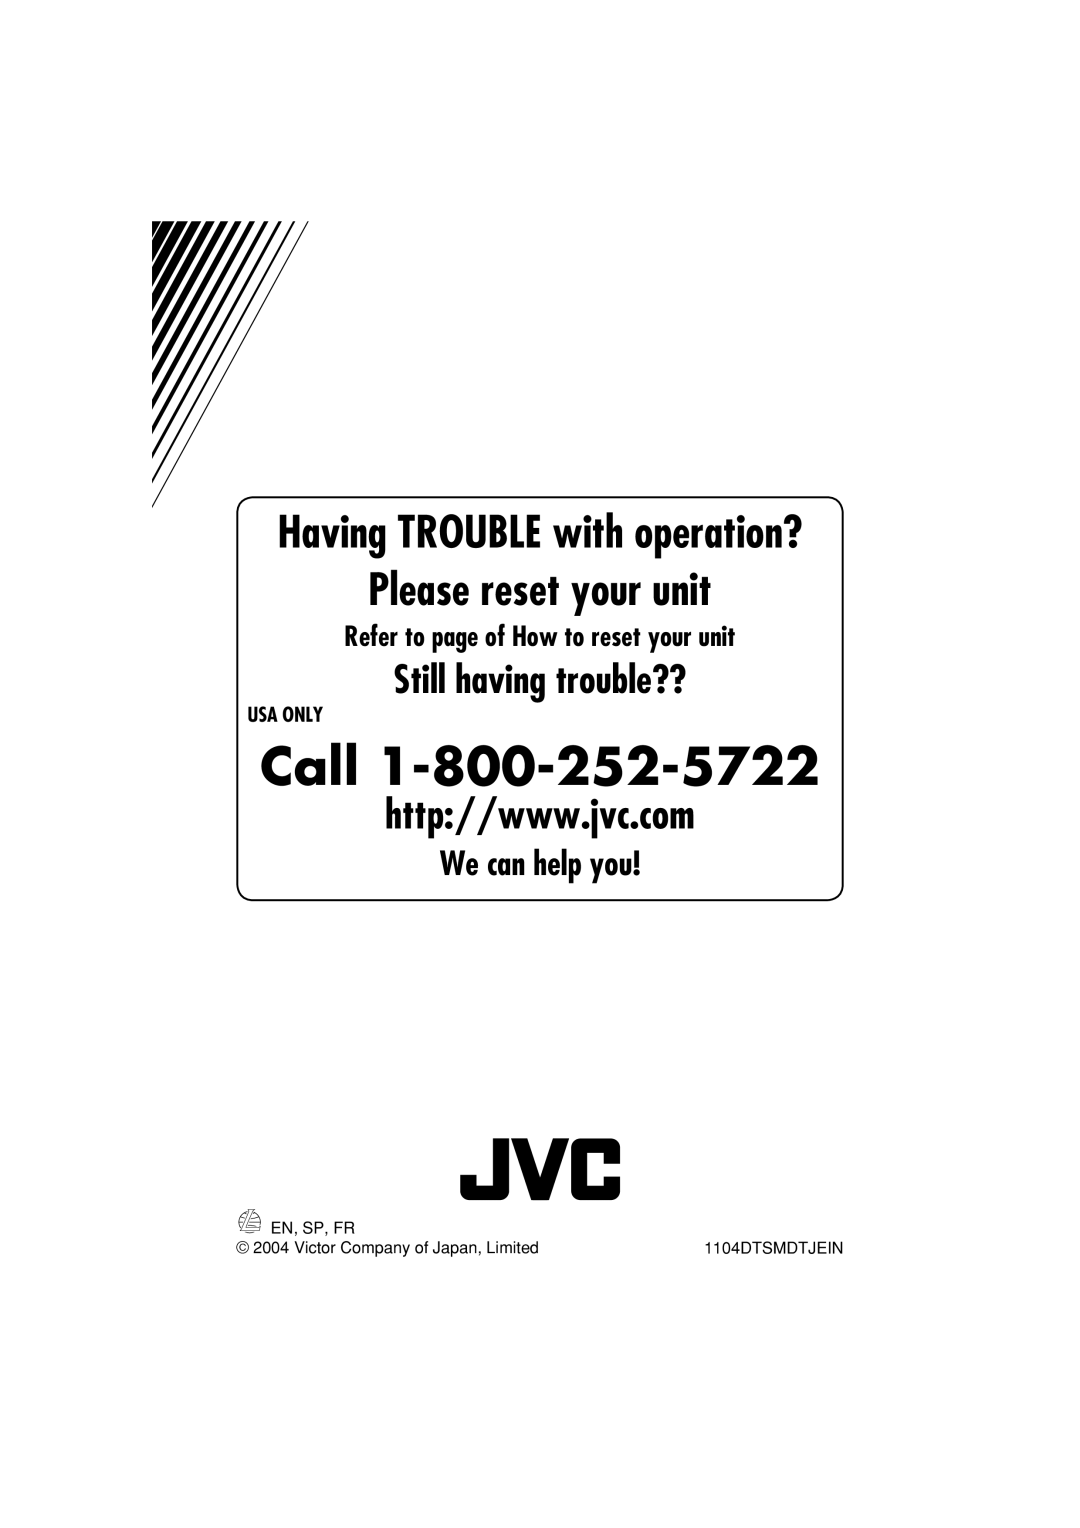 JVC KD-AR560, KD-G510 We can help you, Refer to page of How to reset your unit, Usa Only, Call, Please reset your unit 